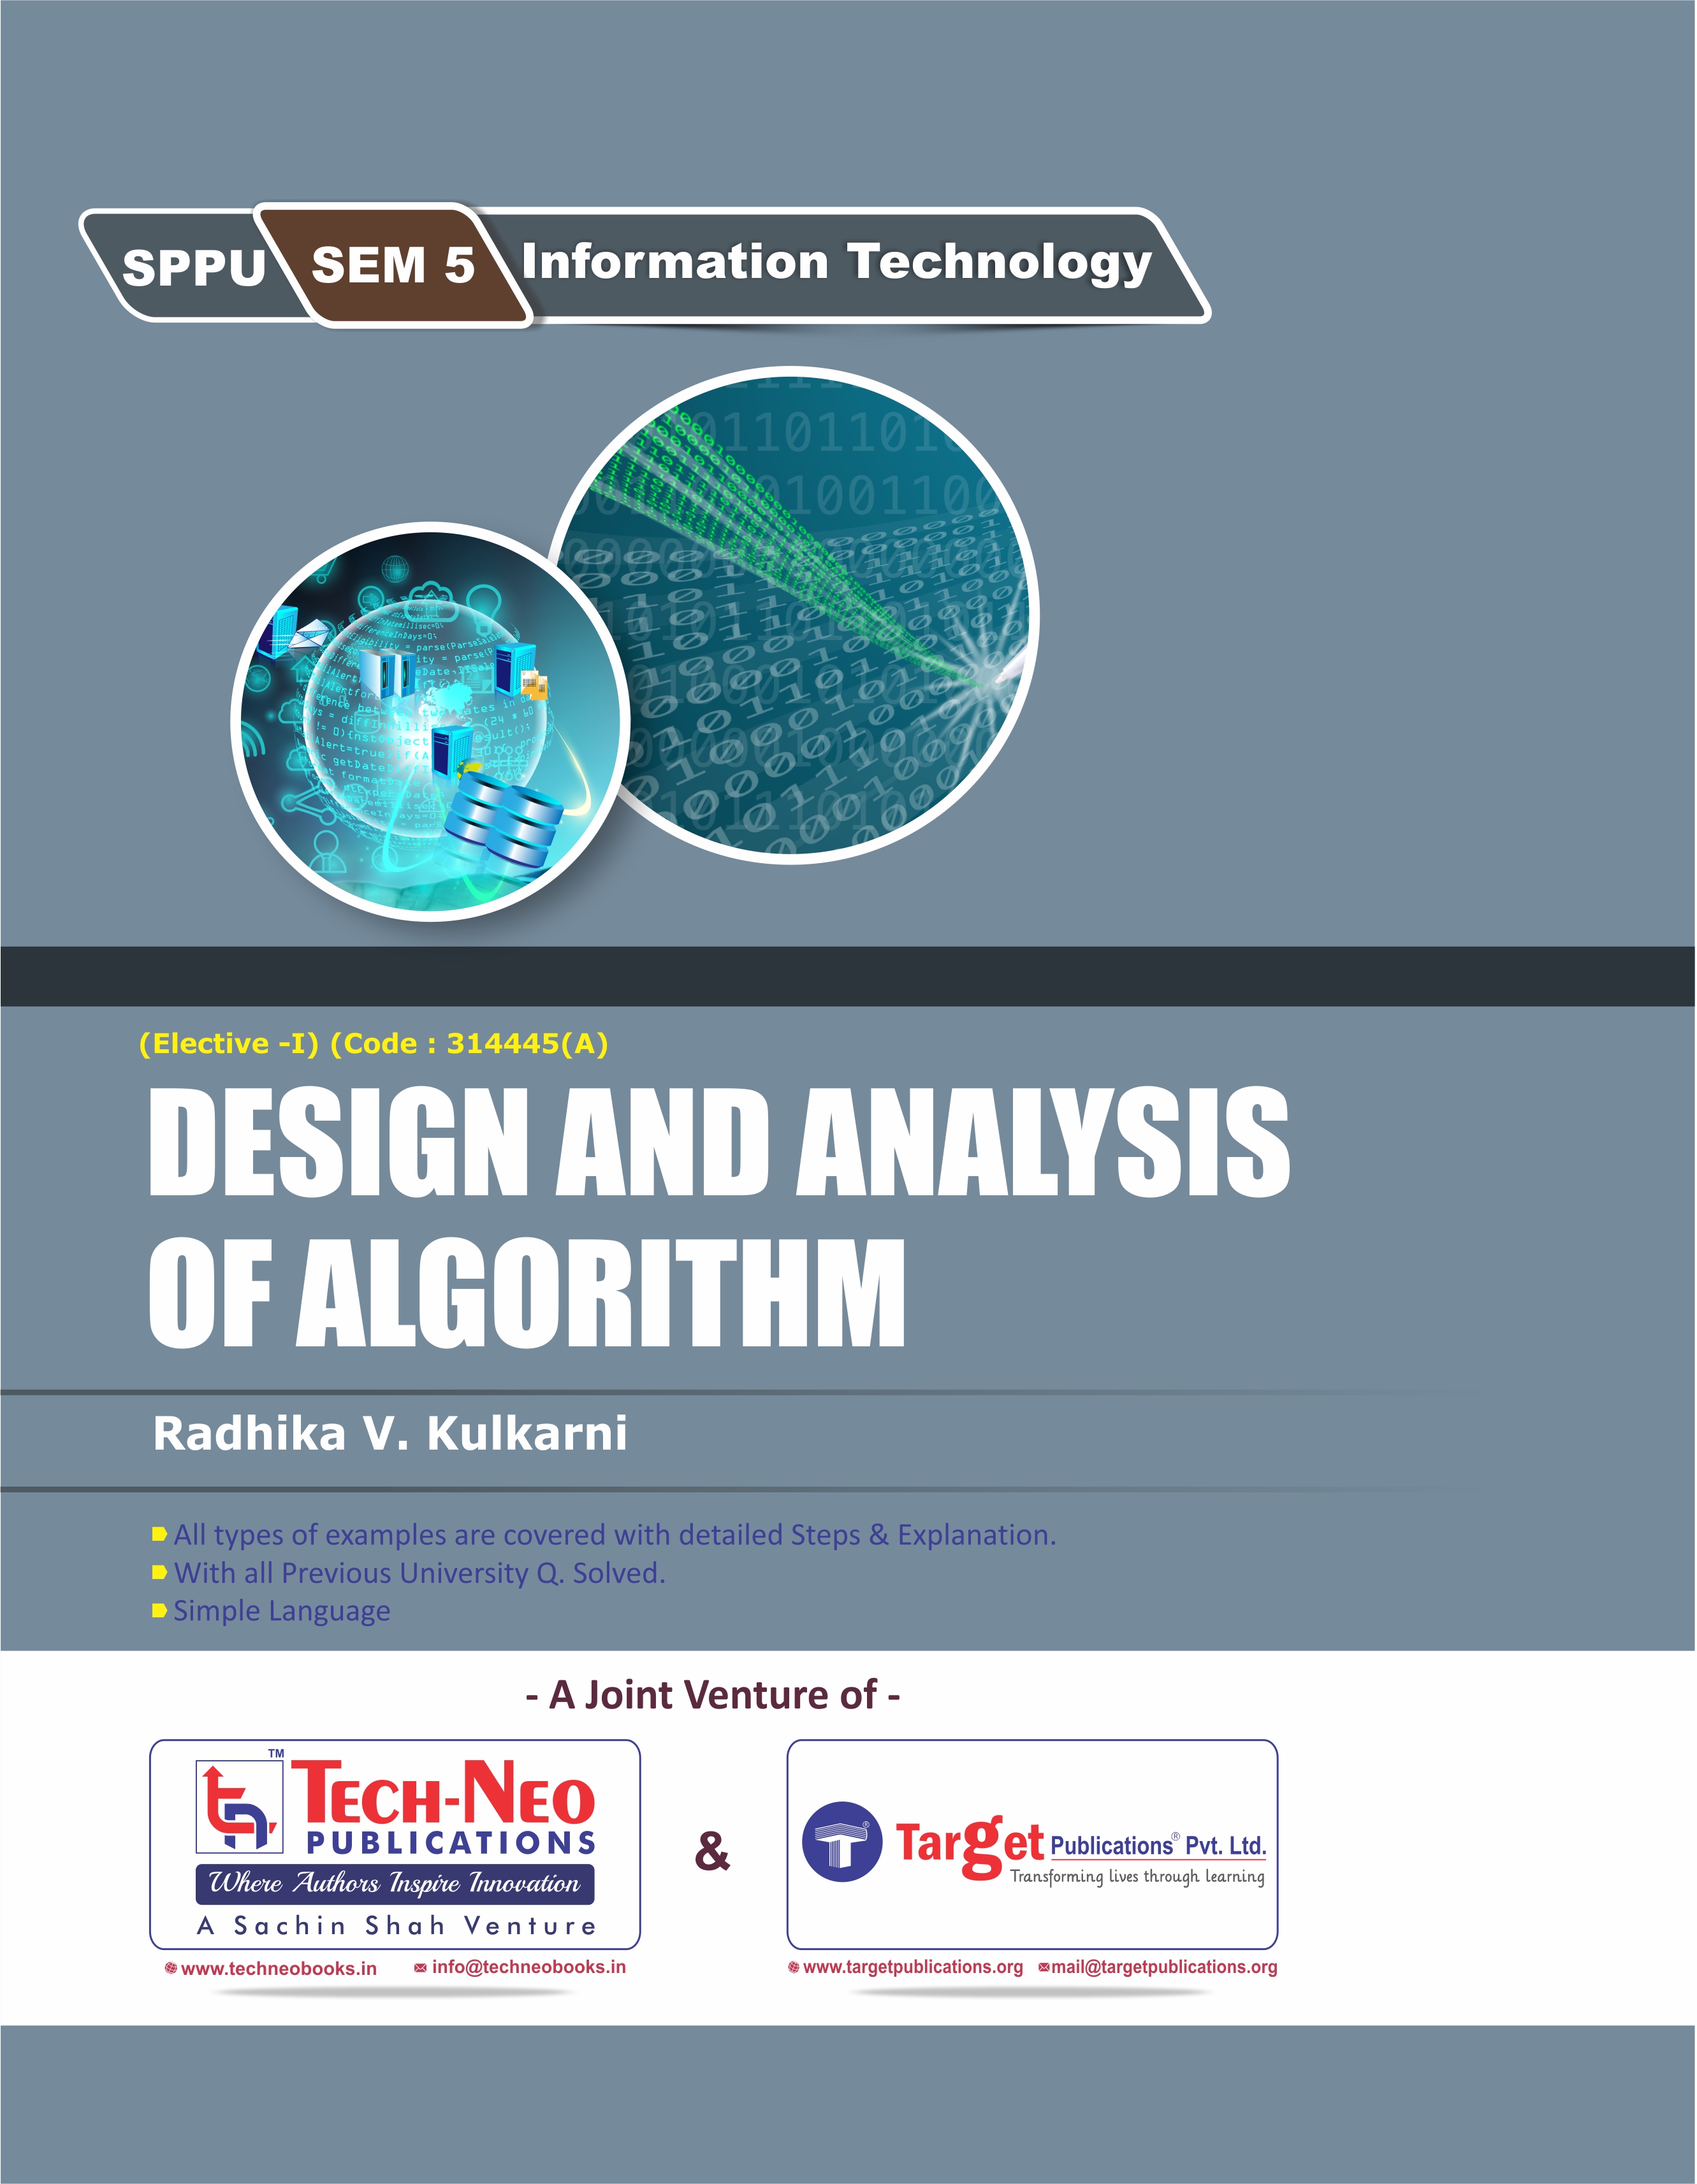 Design and Analysis of Algorithm